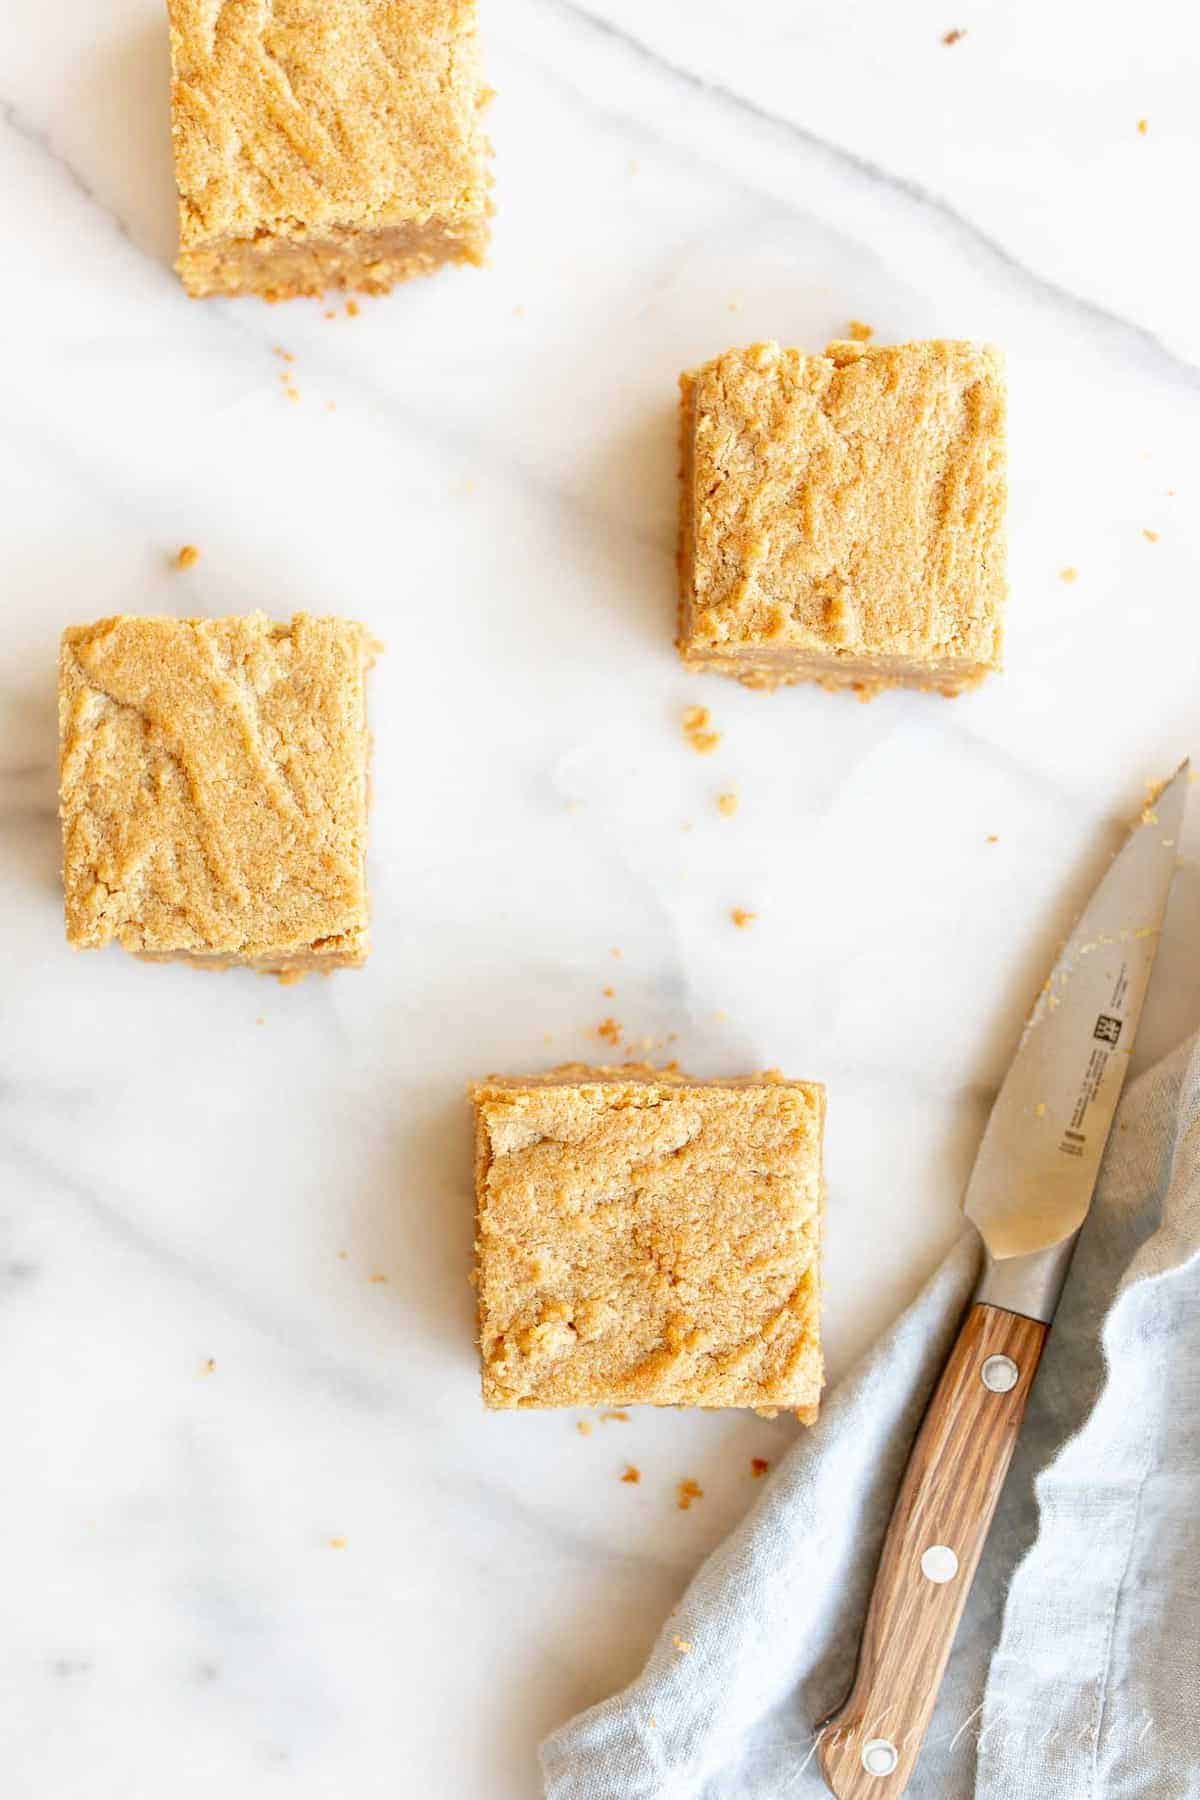 4 blondies and crumbs by knife